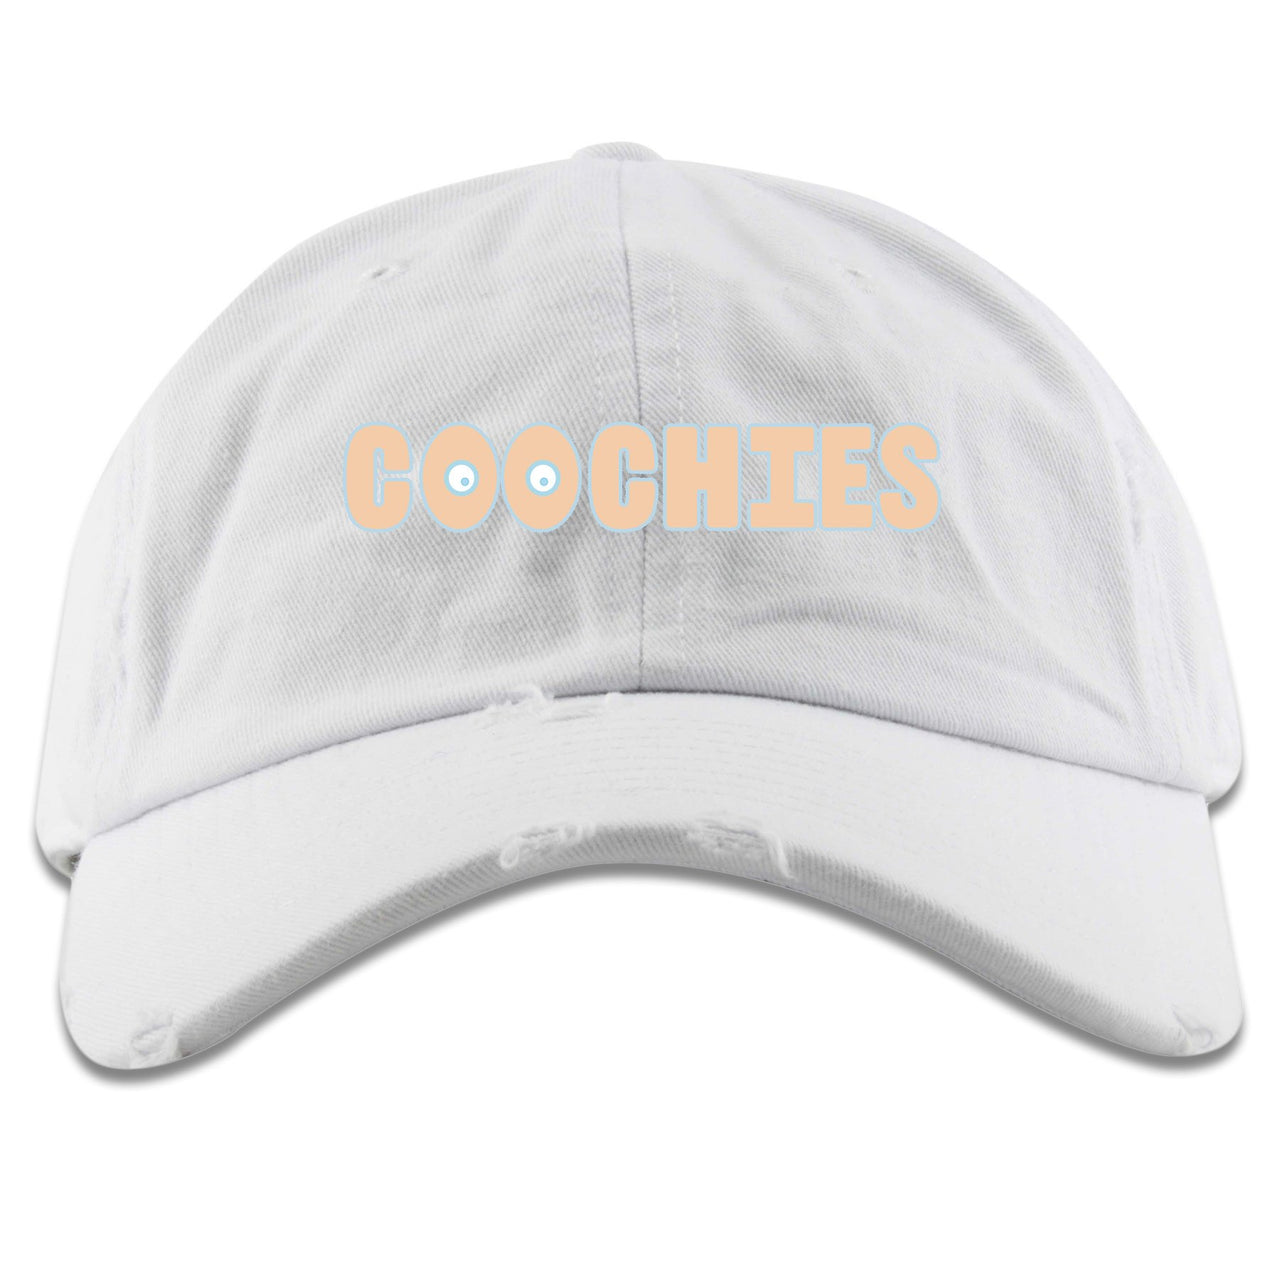 Hyperspace 350s Distressed Dad Hat | Coochies, White